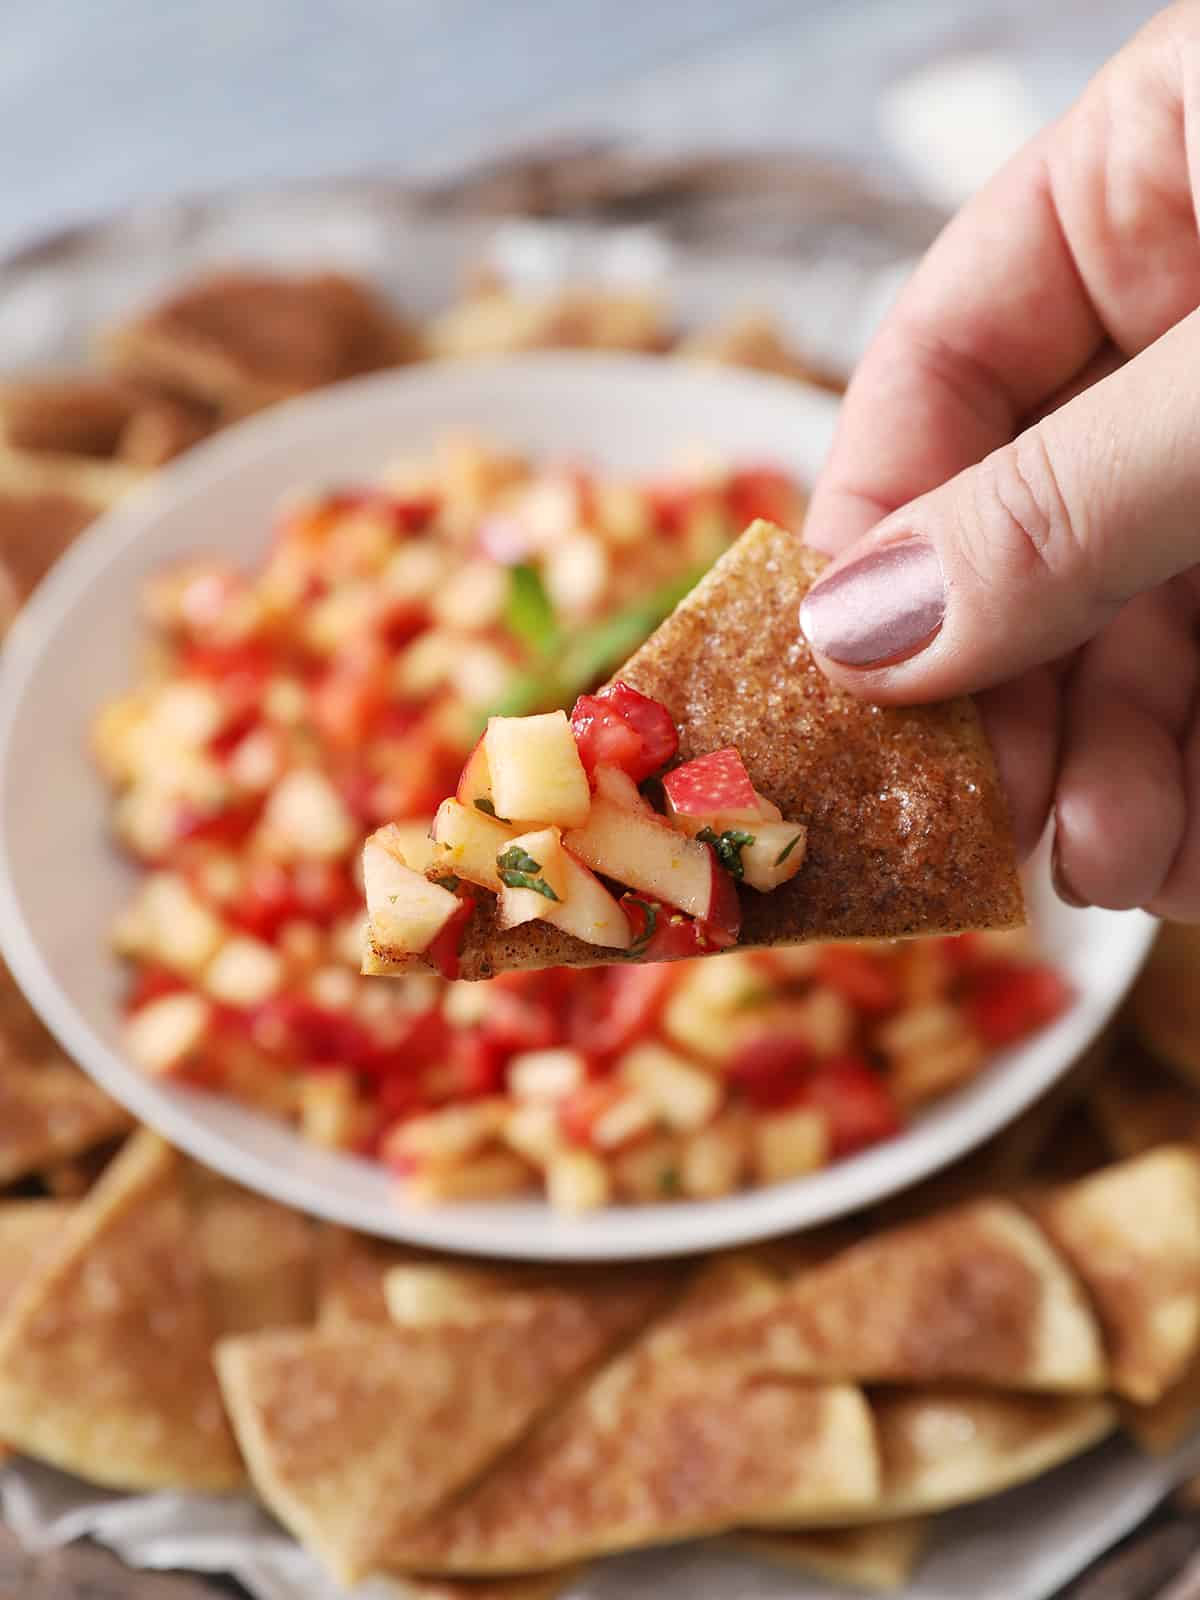 A hand holding a cinnamon tortilla chip with fresh fruit salsa on it.